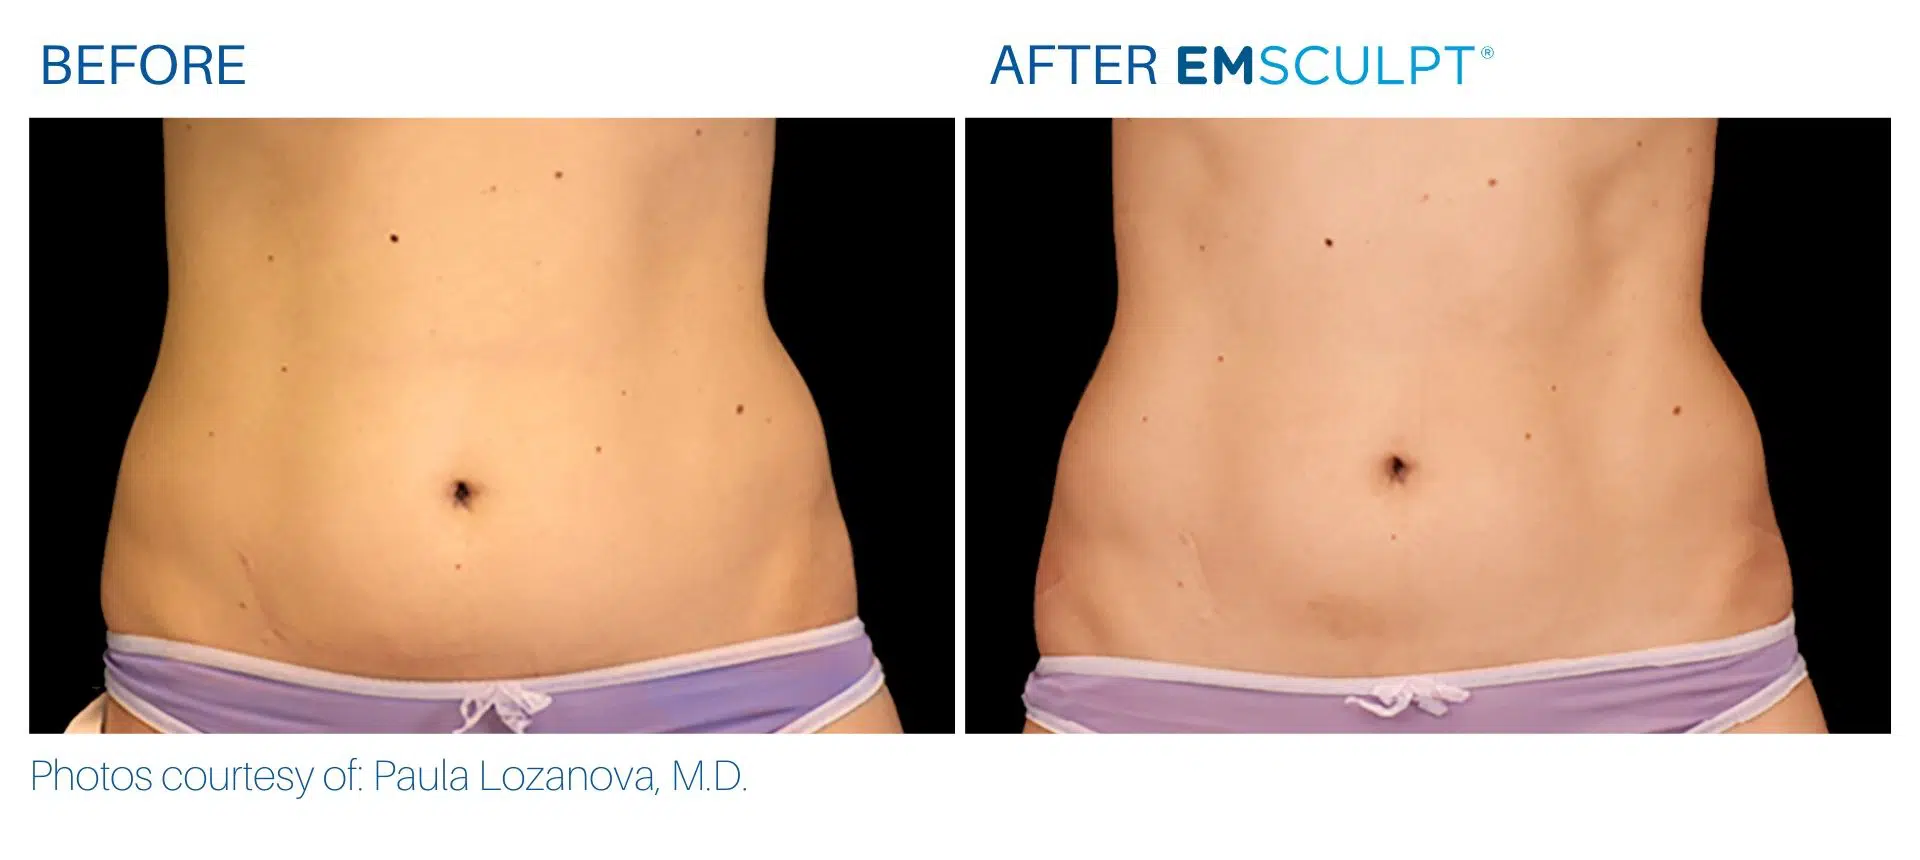 Emsculpt before and after transformations after treatment